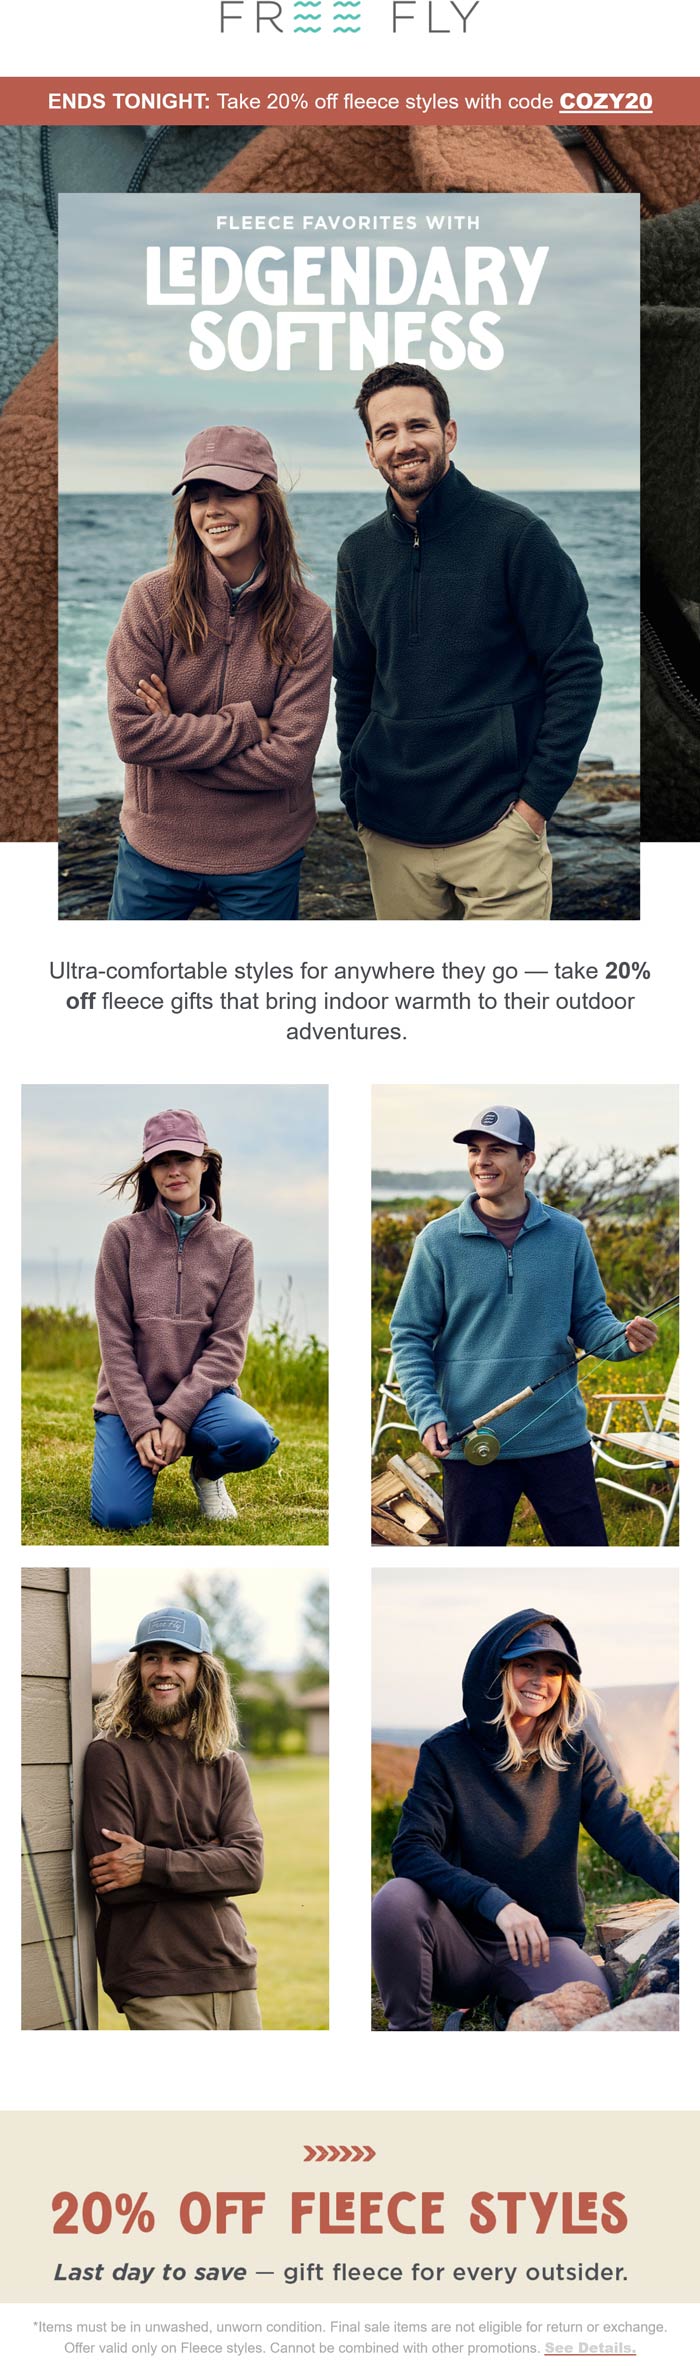 Free Fly stores Coupon  20% off fleece today at Free Fly via promo code COZY20 #freefly 